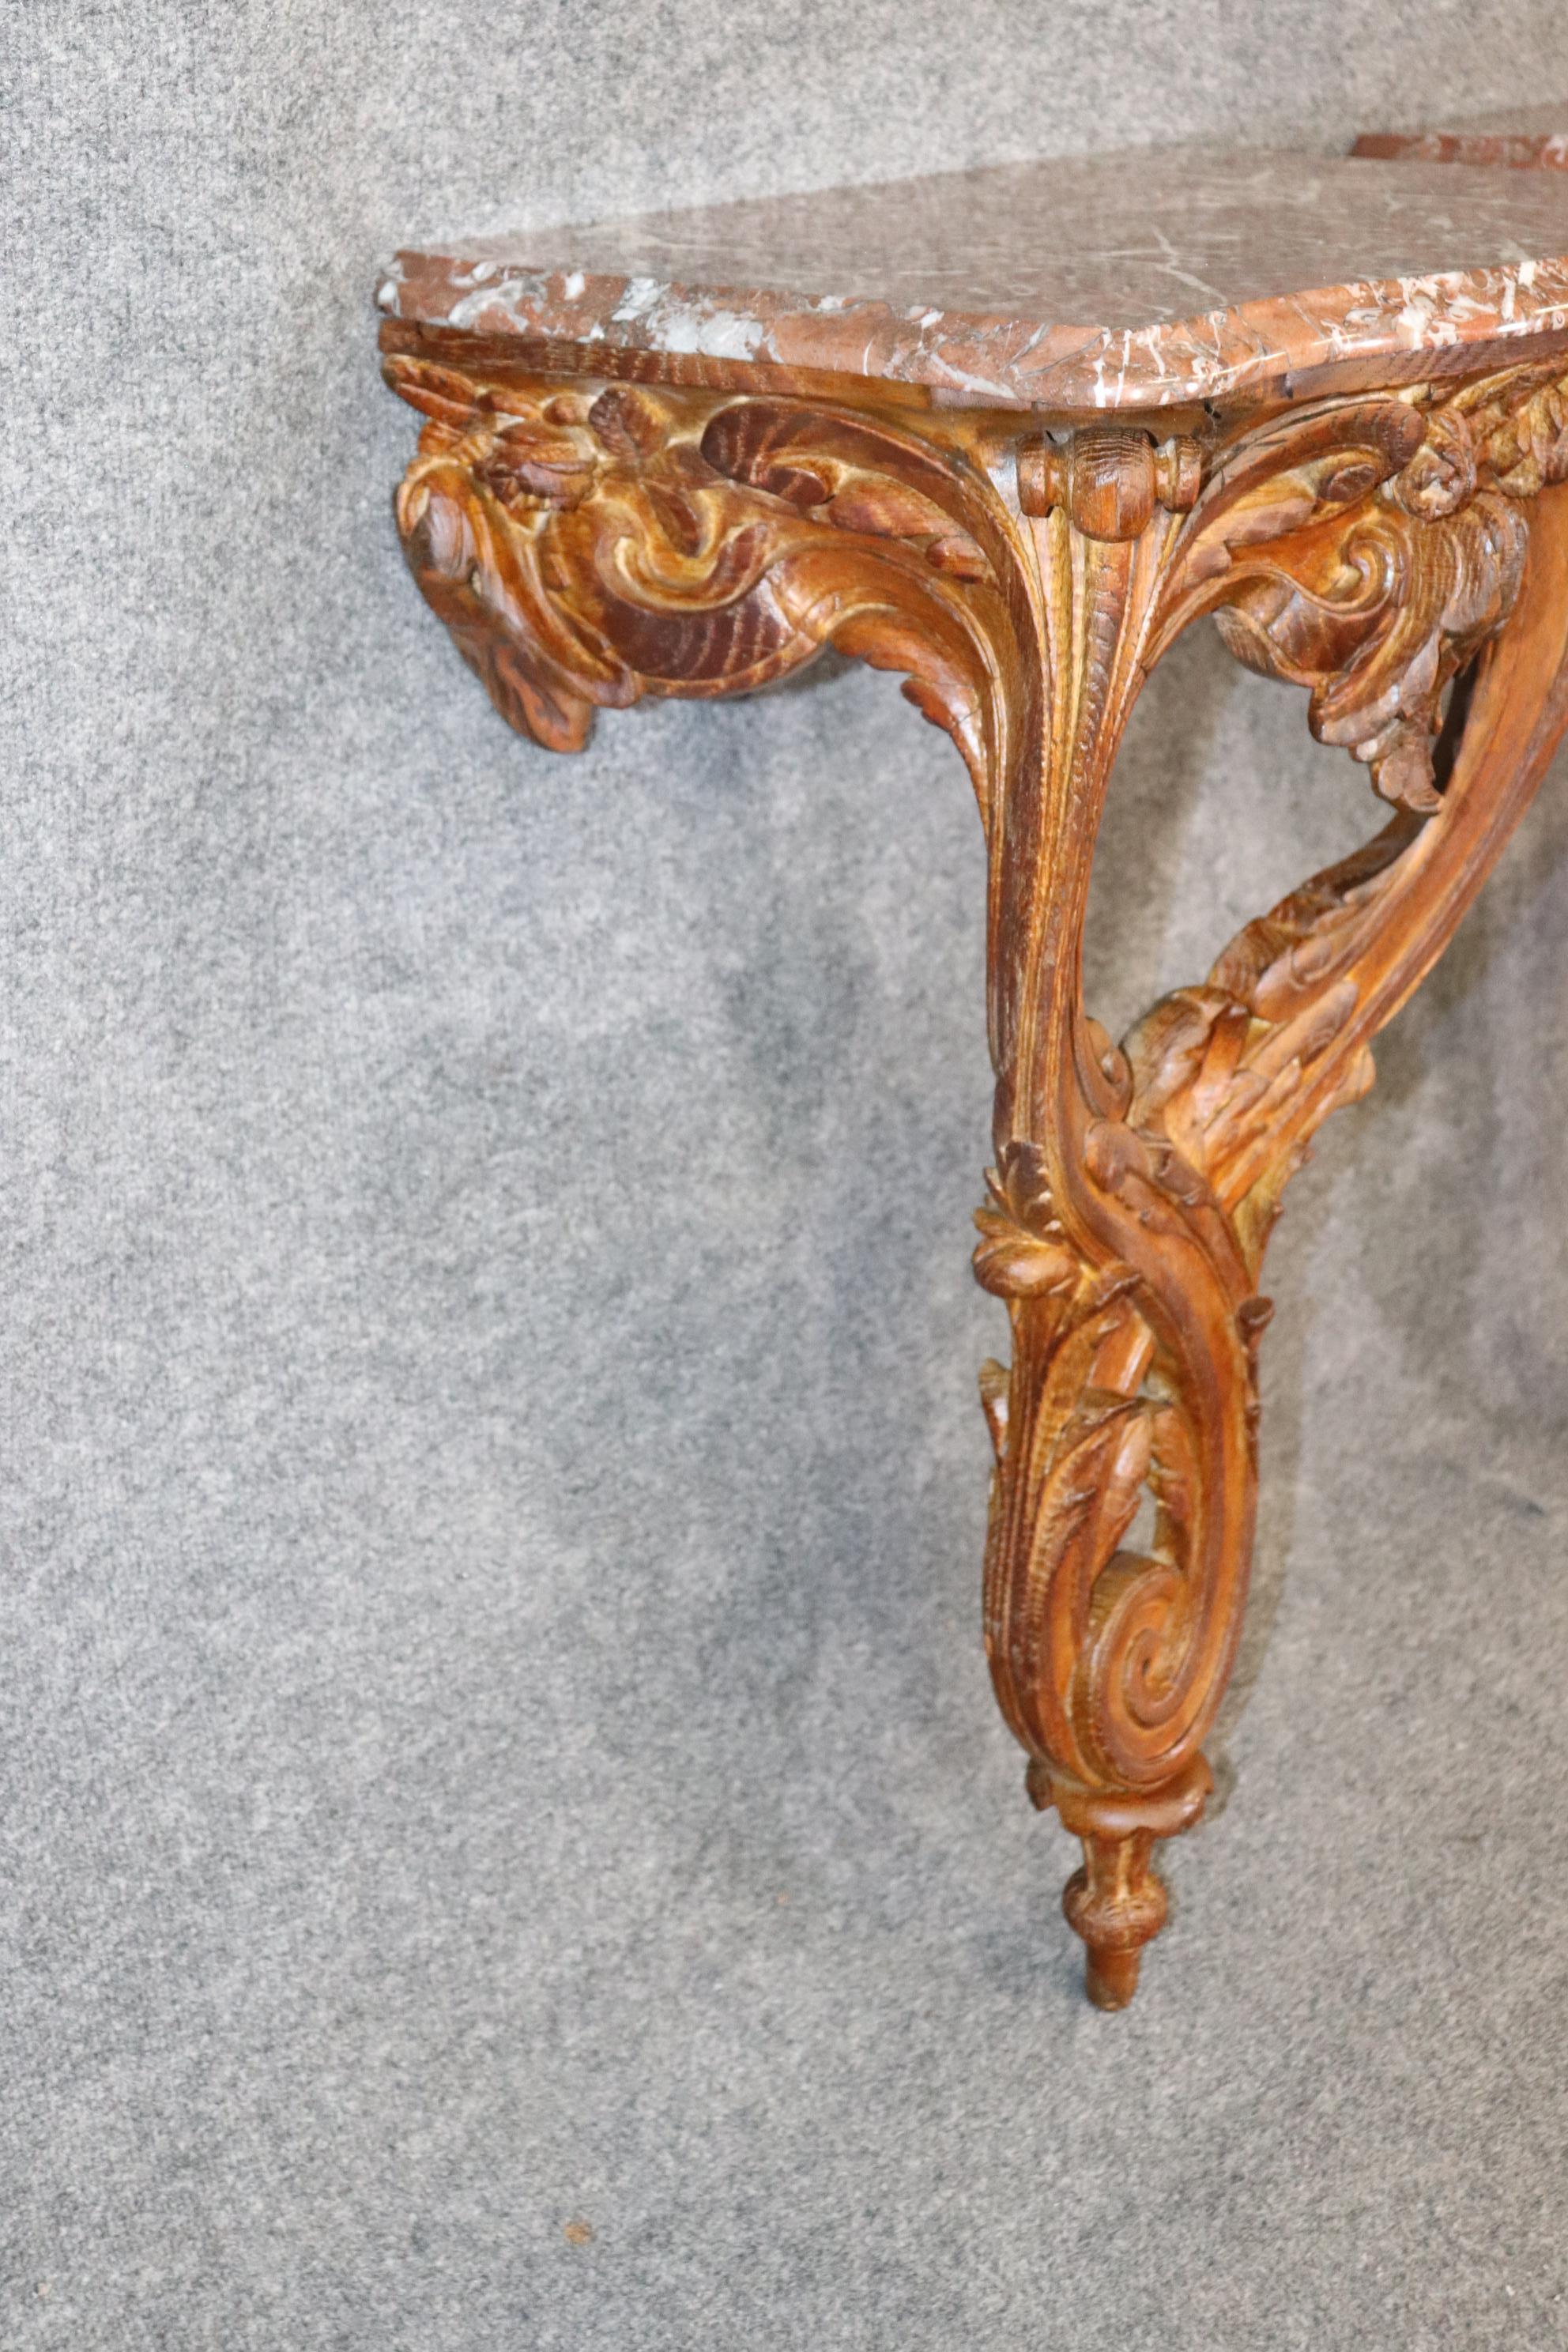 Dimensions- H: 33in W: 20in D: 14 1/4in 

This Incredibly rare Pair of Maison Jansen oak marble top wall hanging consoles are nothing but exceptional! If you take a look at the photos provided you will see the attention to detail throughout both